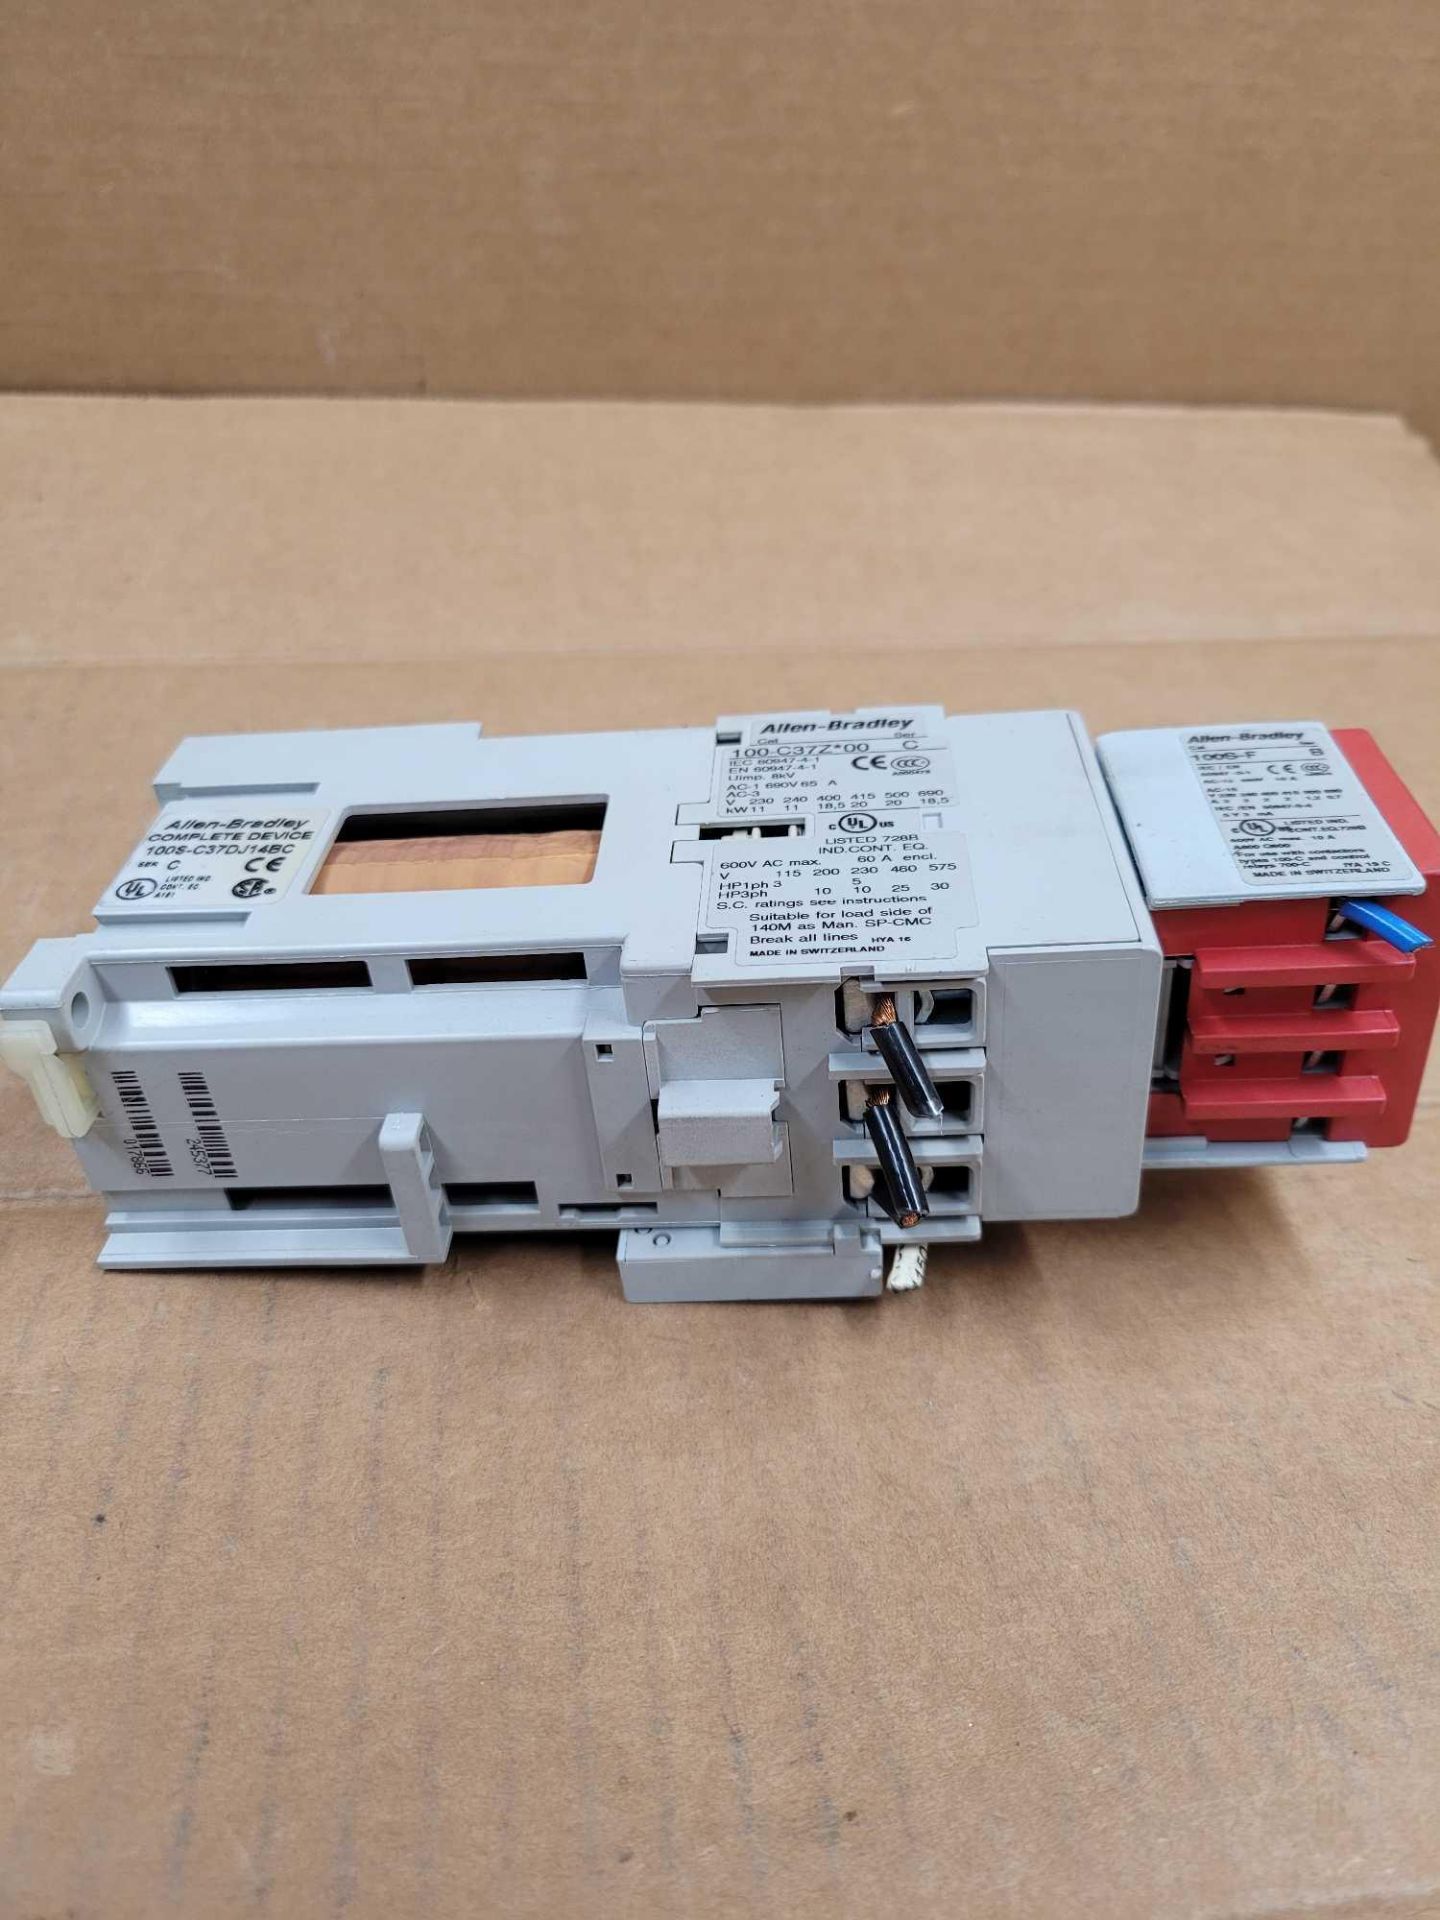 LOT OF 5 ALLEN BRADLEY 100S-C37DJ14BC / Guardmaster Safety Contactor  /  Lot Weight: 10.6 lbs - Image 4 of 8